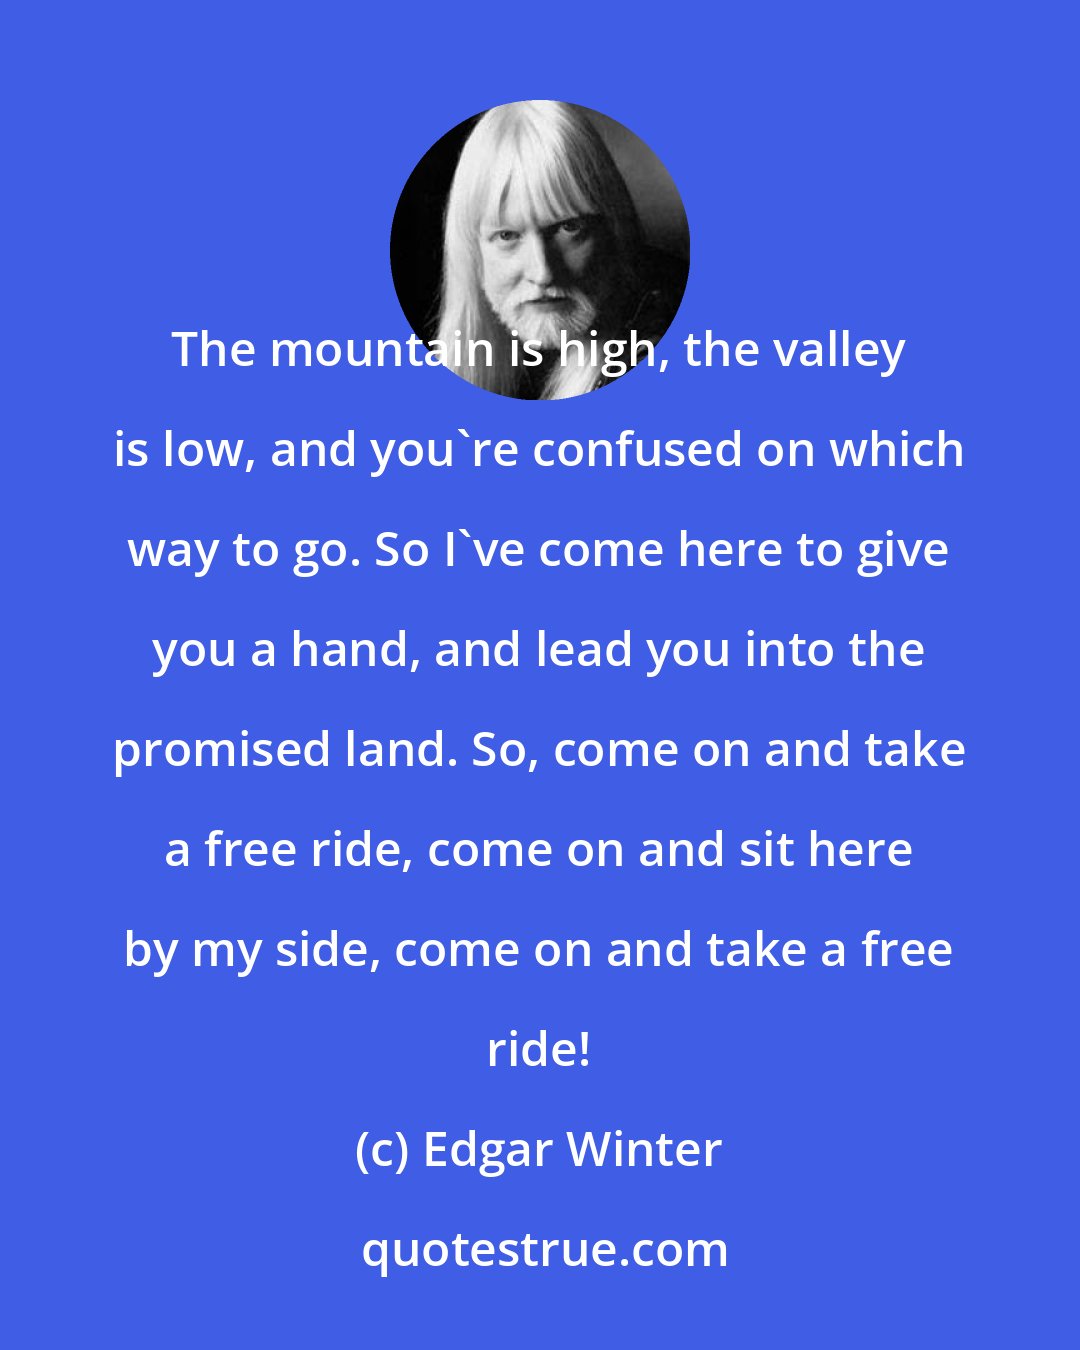 Edgar Winter: The mountain is high, the valley is low, and you're confused on which way to go. So I've come here to give you a hand, and lead you into the promised land. So, come on and take a free ride, come on and sit here by my side, come on and take a free ride!